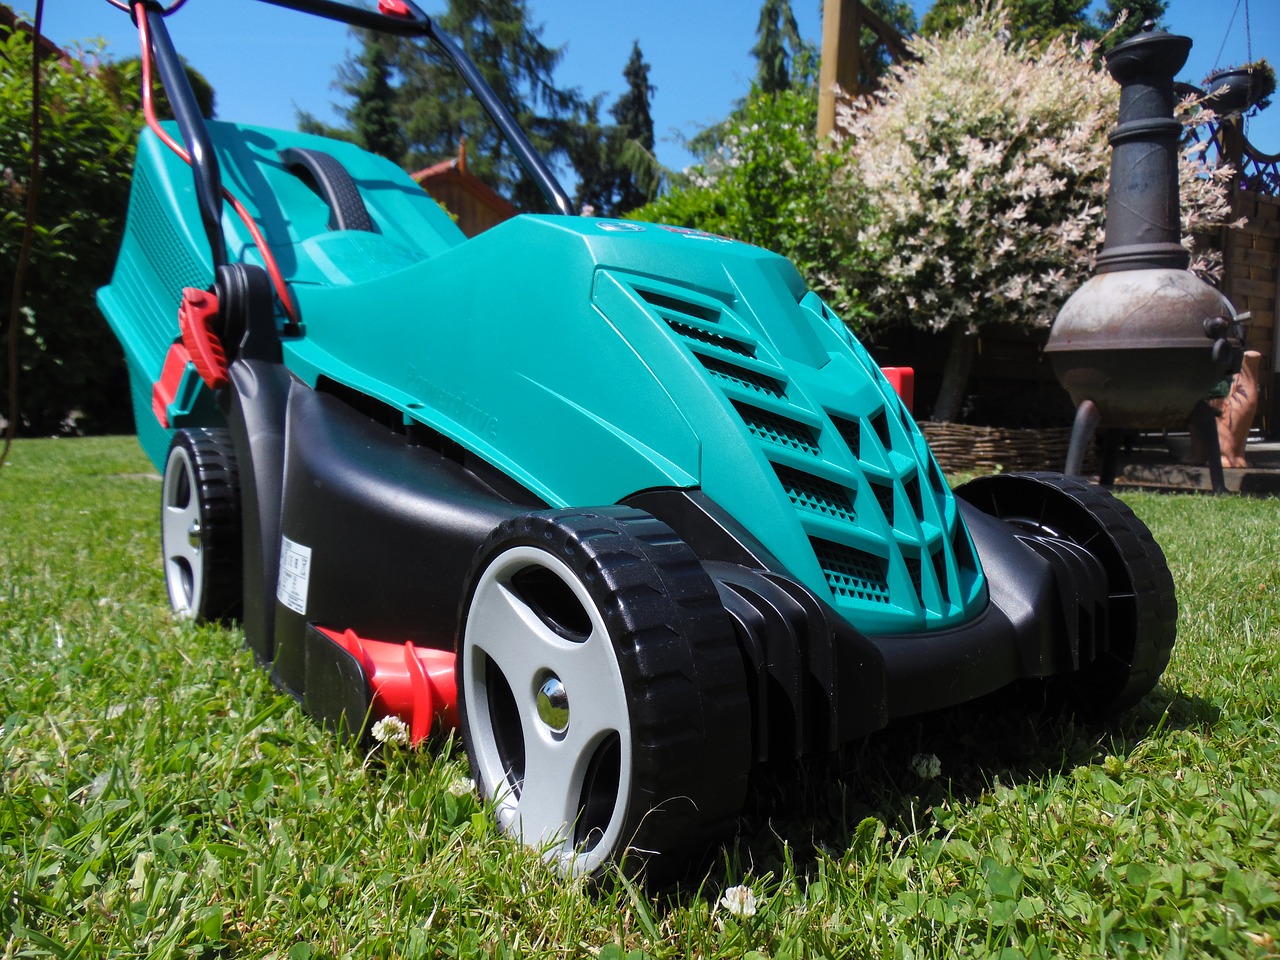 Image - lawn mower leisure hobby lawn care